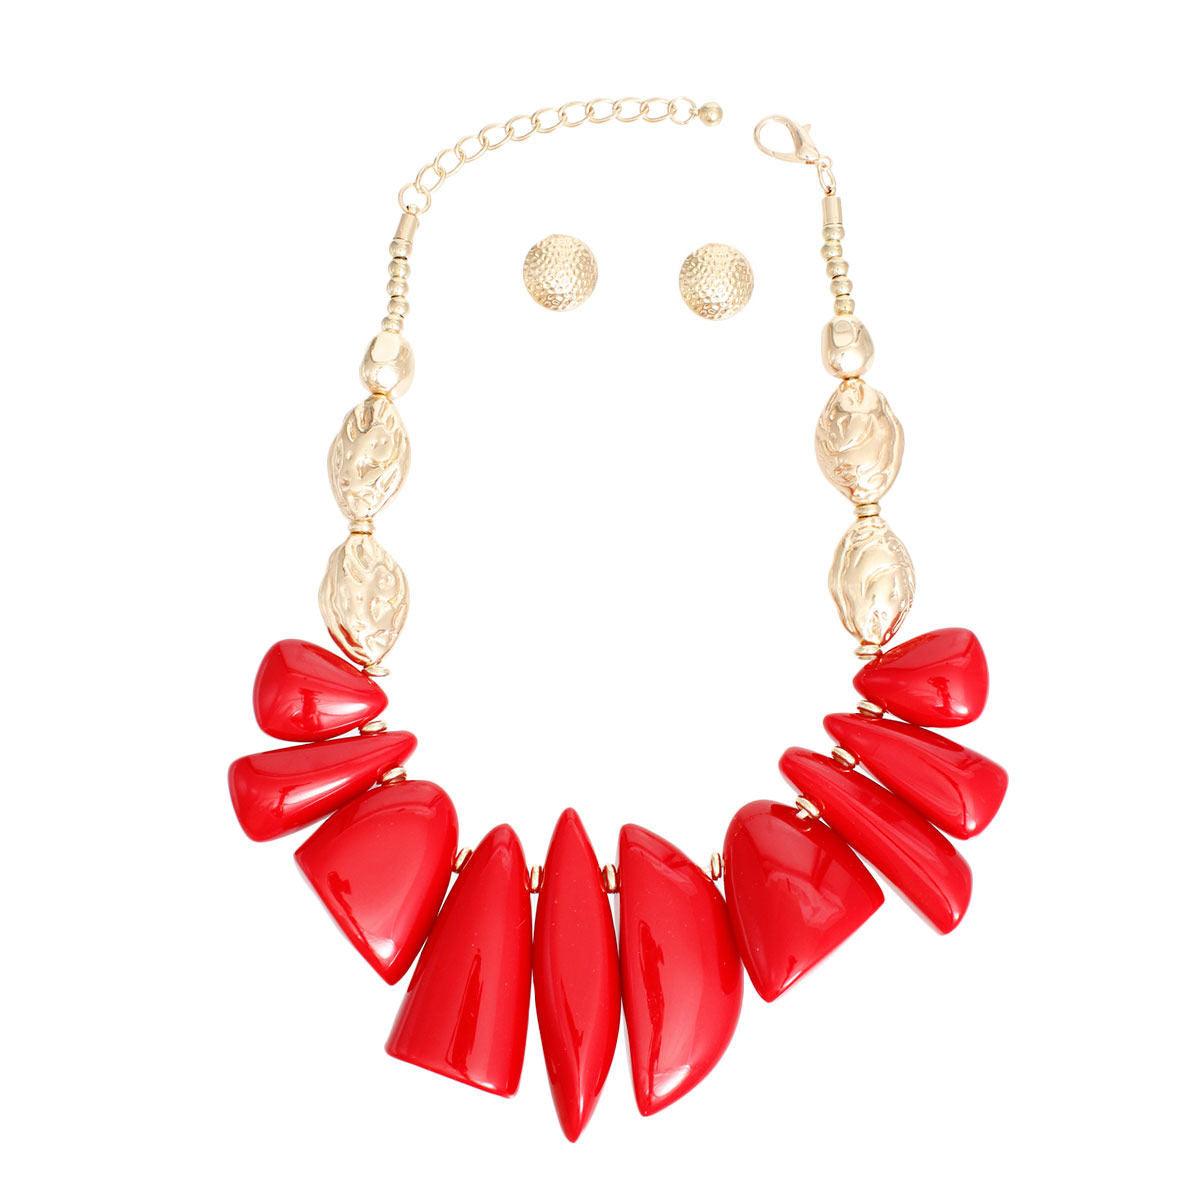 Chunky Red Bead Necklace Set: Fashion Jewelry that Adds Flair